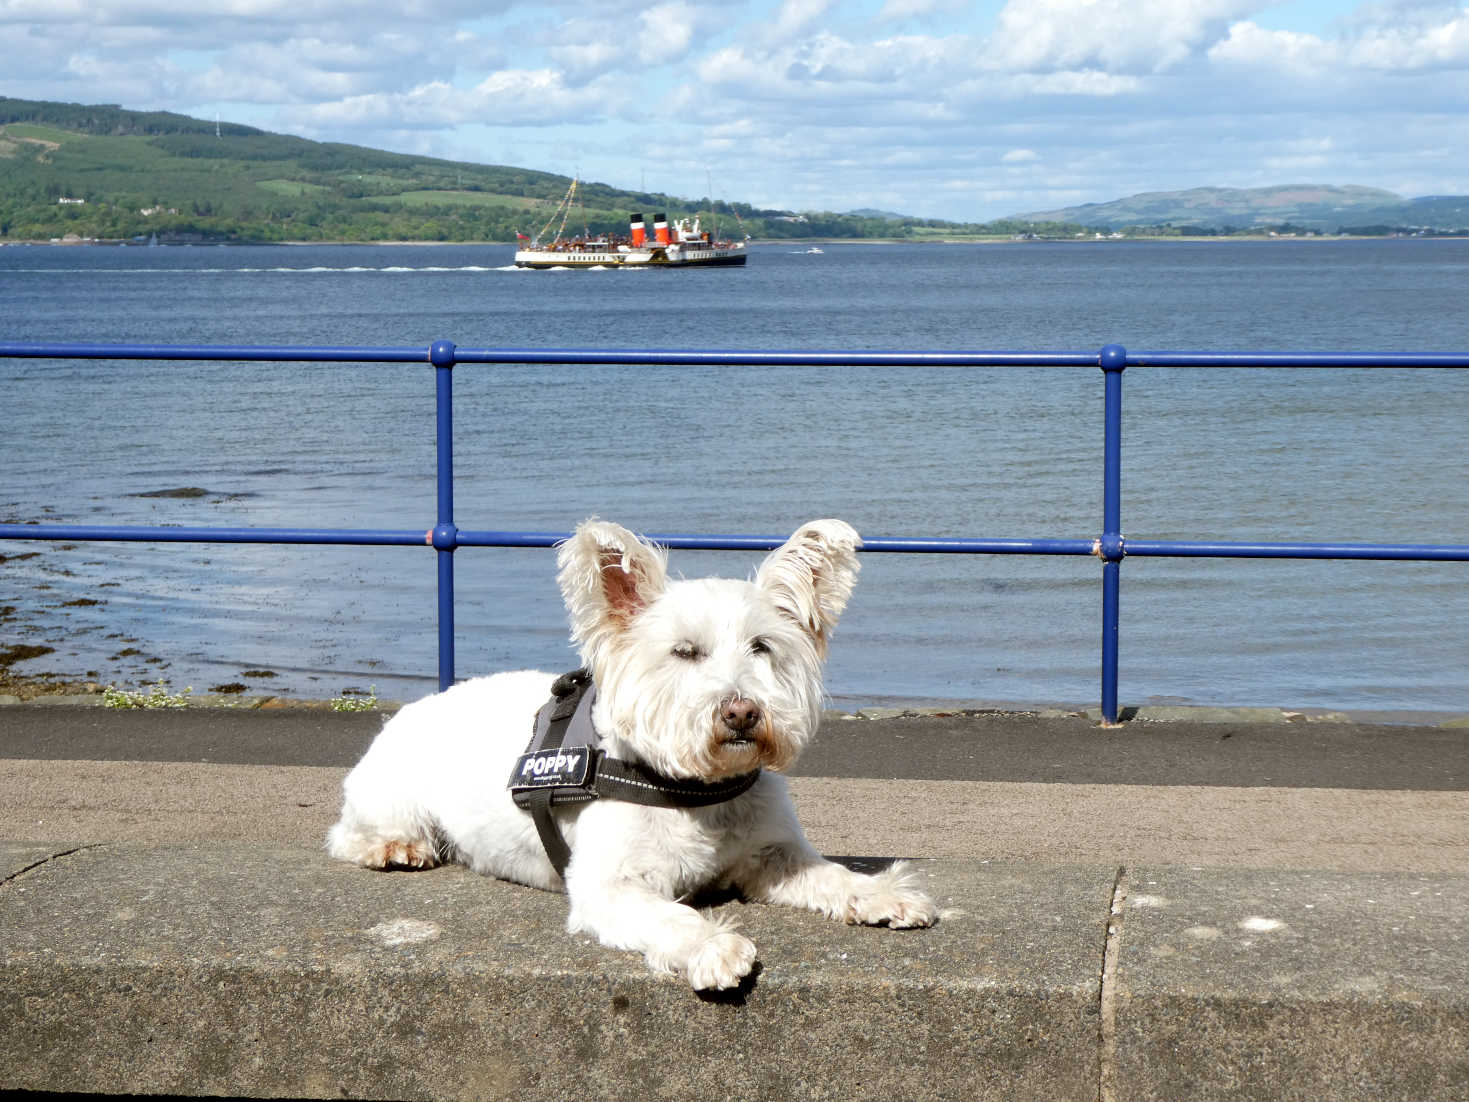 Poppy the Westie and the Waverley